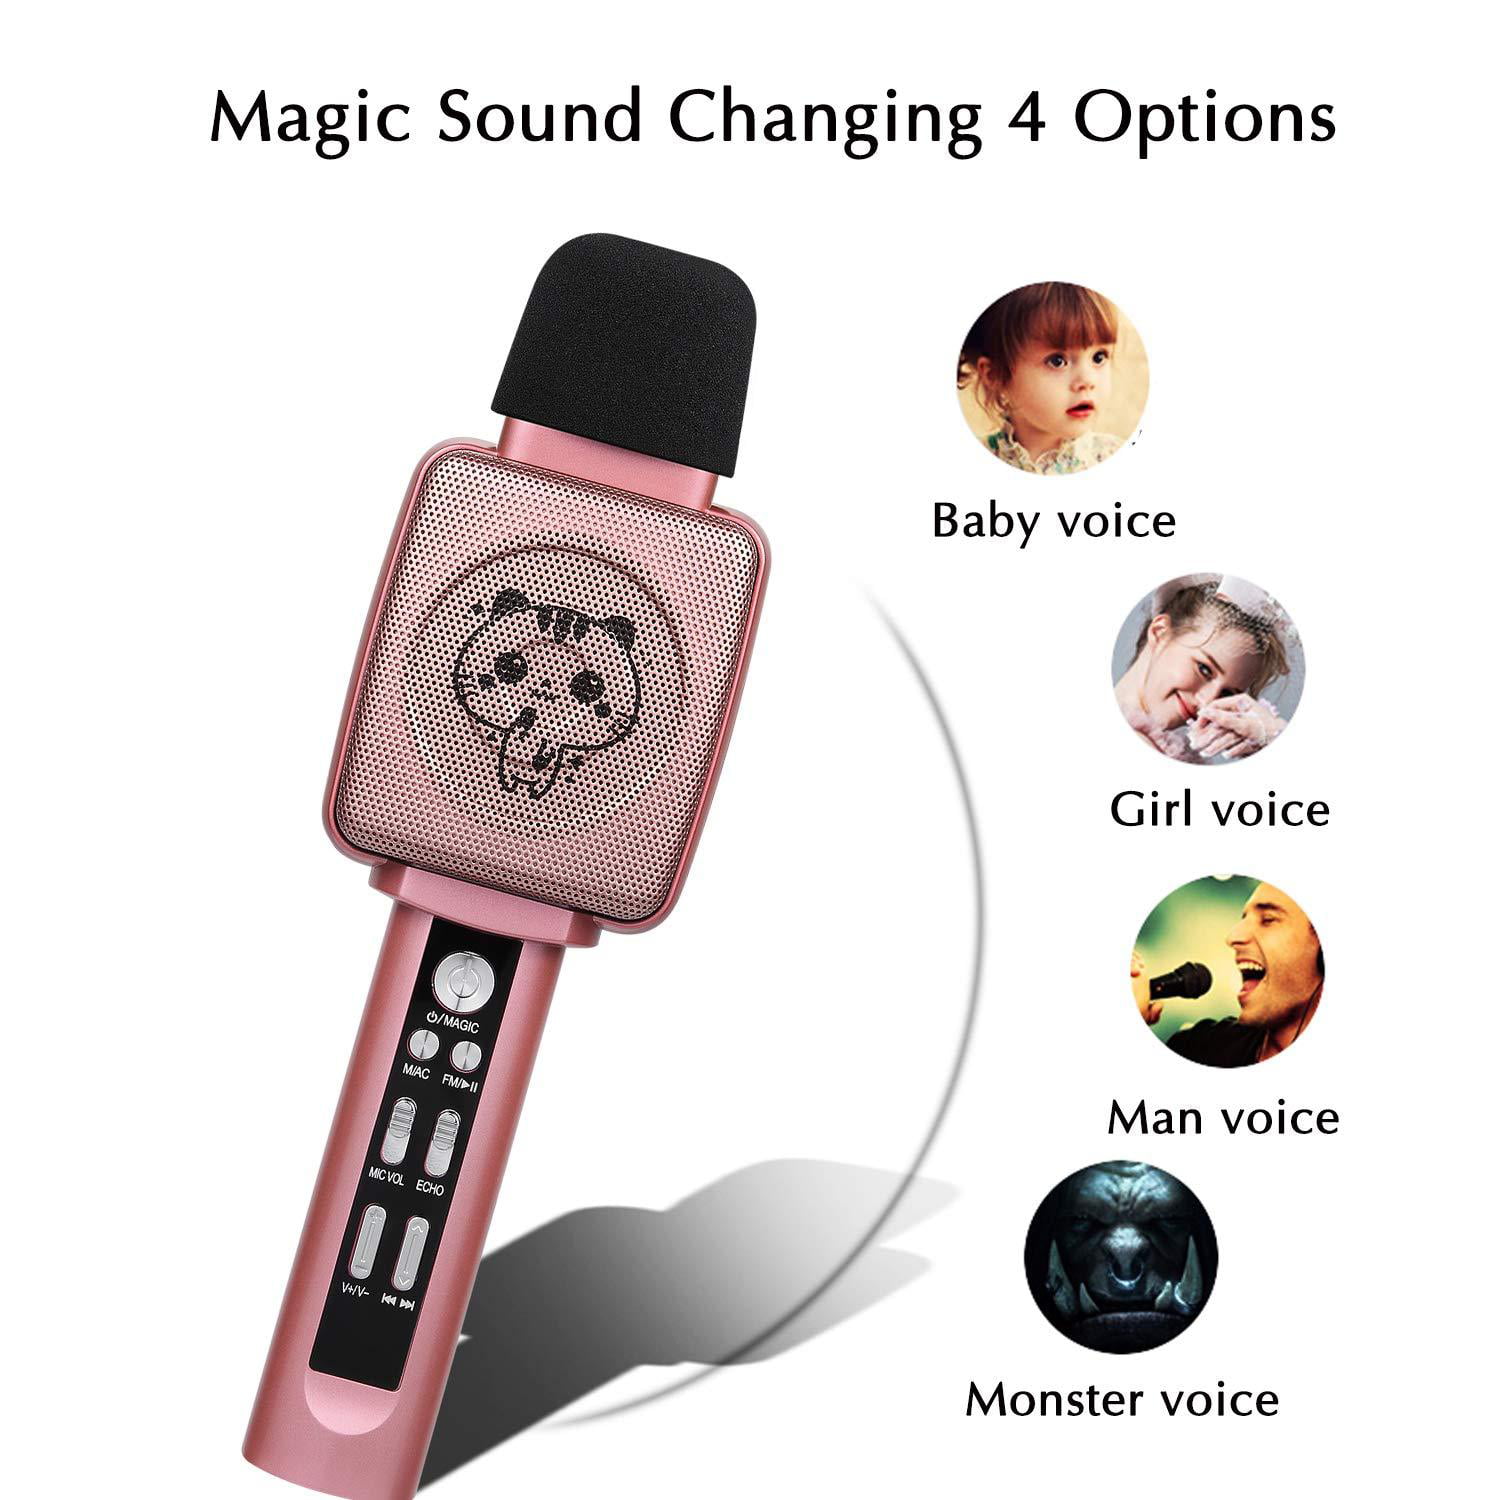 Toys For 3-16 Years Old Girls Gifts HOKLAN Karaoke Microphone for Kids Age 4-12,Voice Changer green Best Birthday Gifts for 5 6 7 8 9 10 11 Years Old Teens Girl Boys Toddlers 